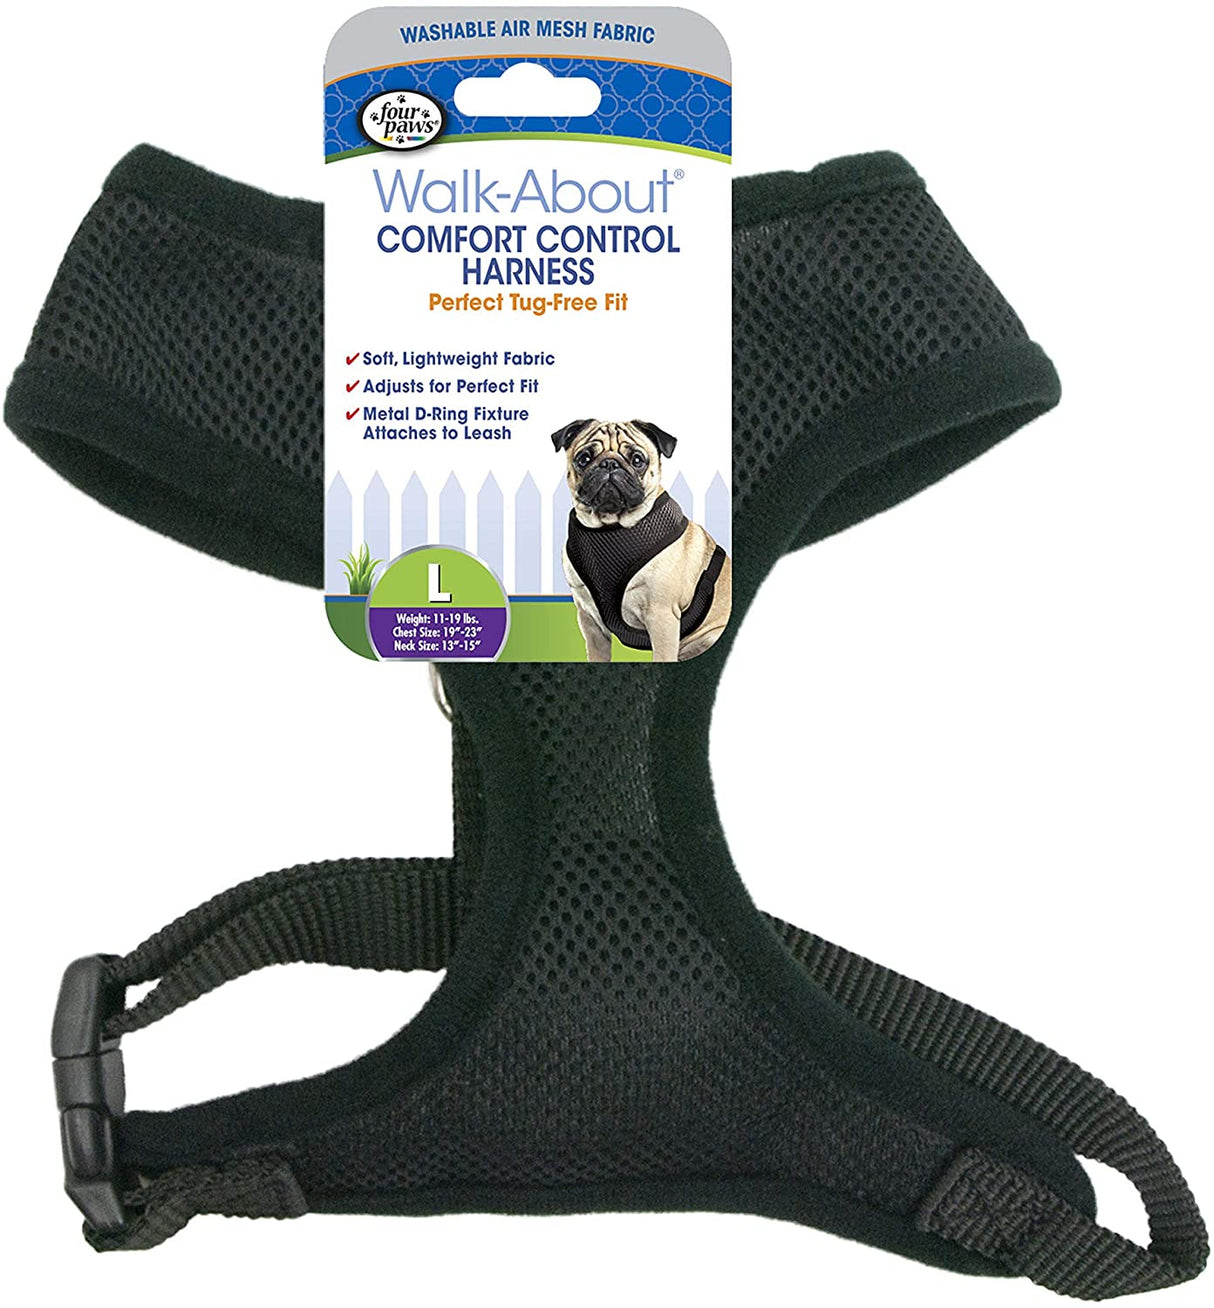 Large - 1 count Four Paws Comfort Control Harness Black